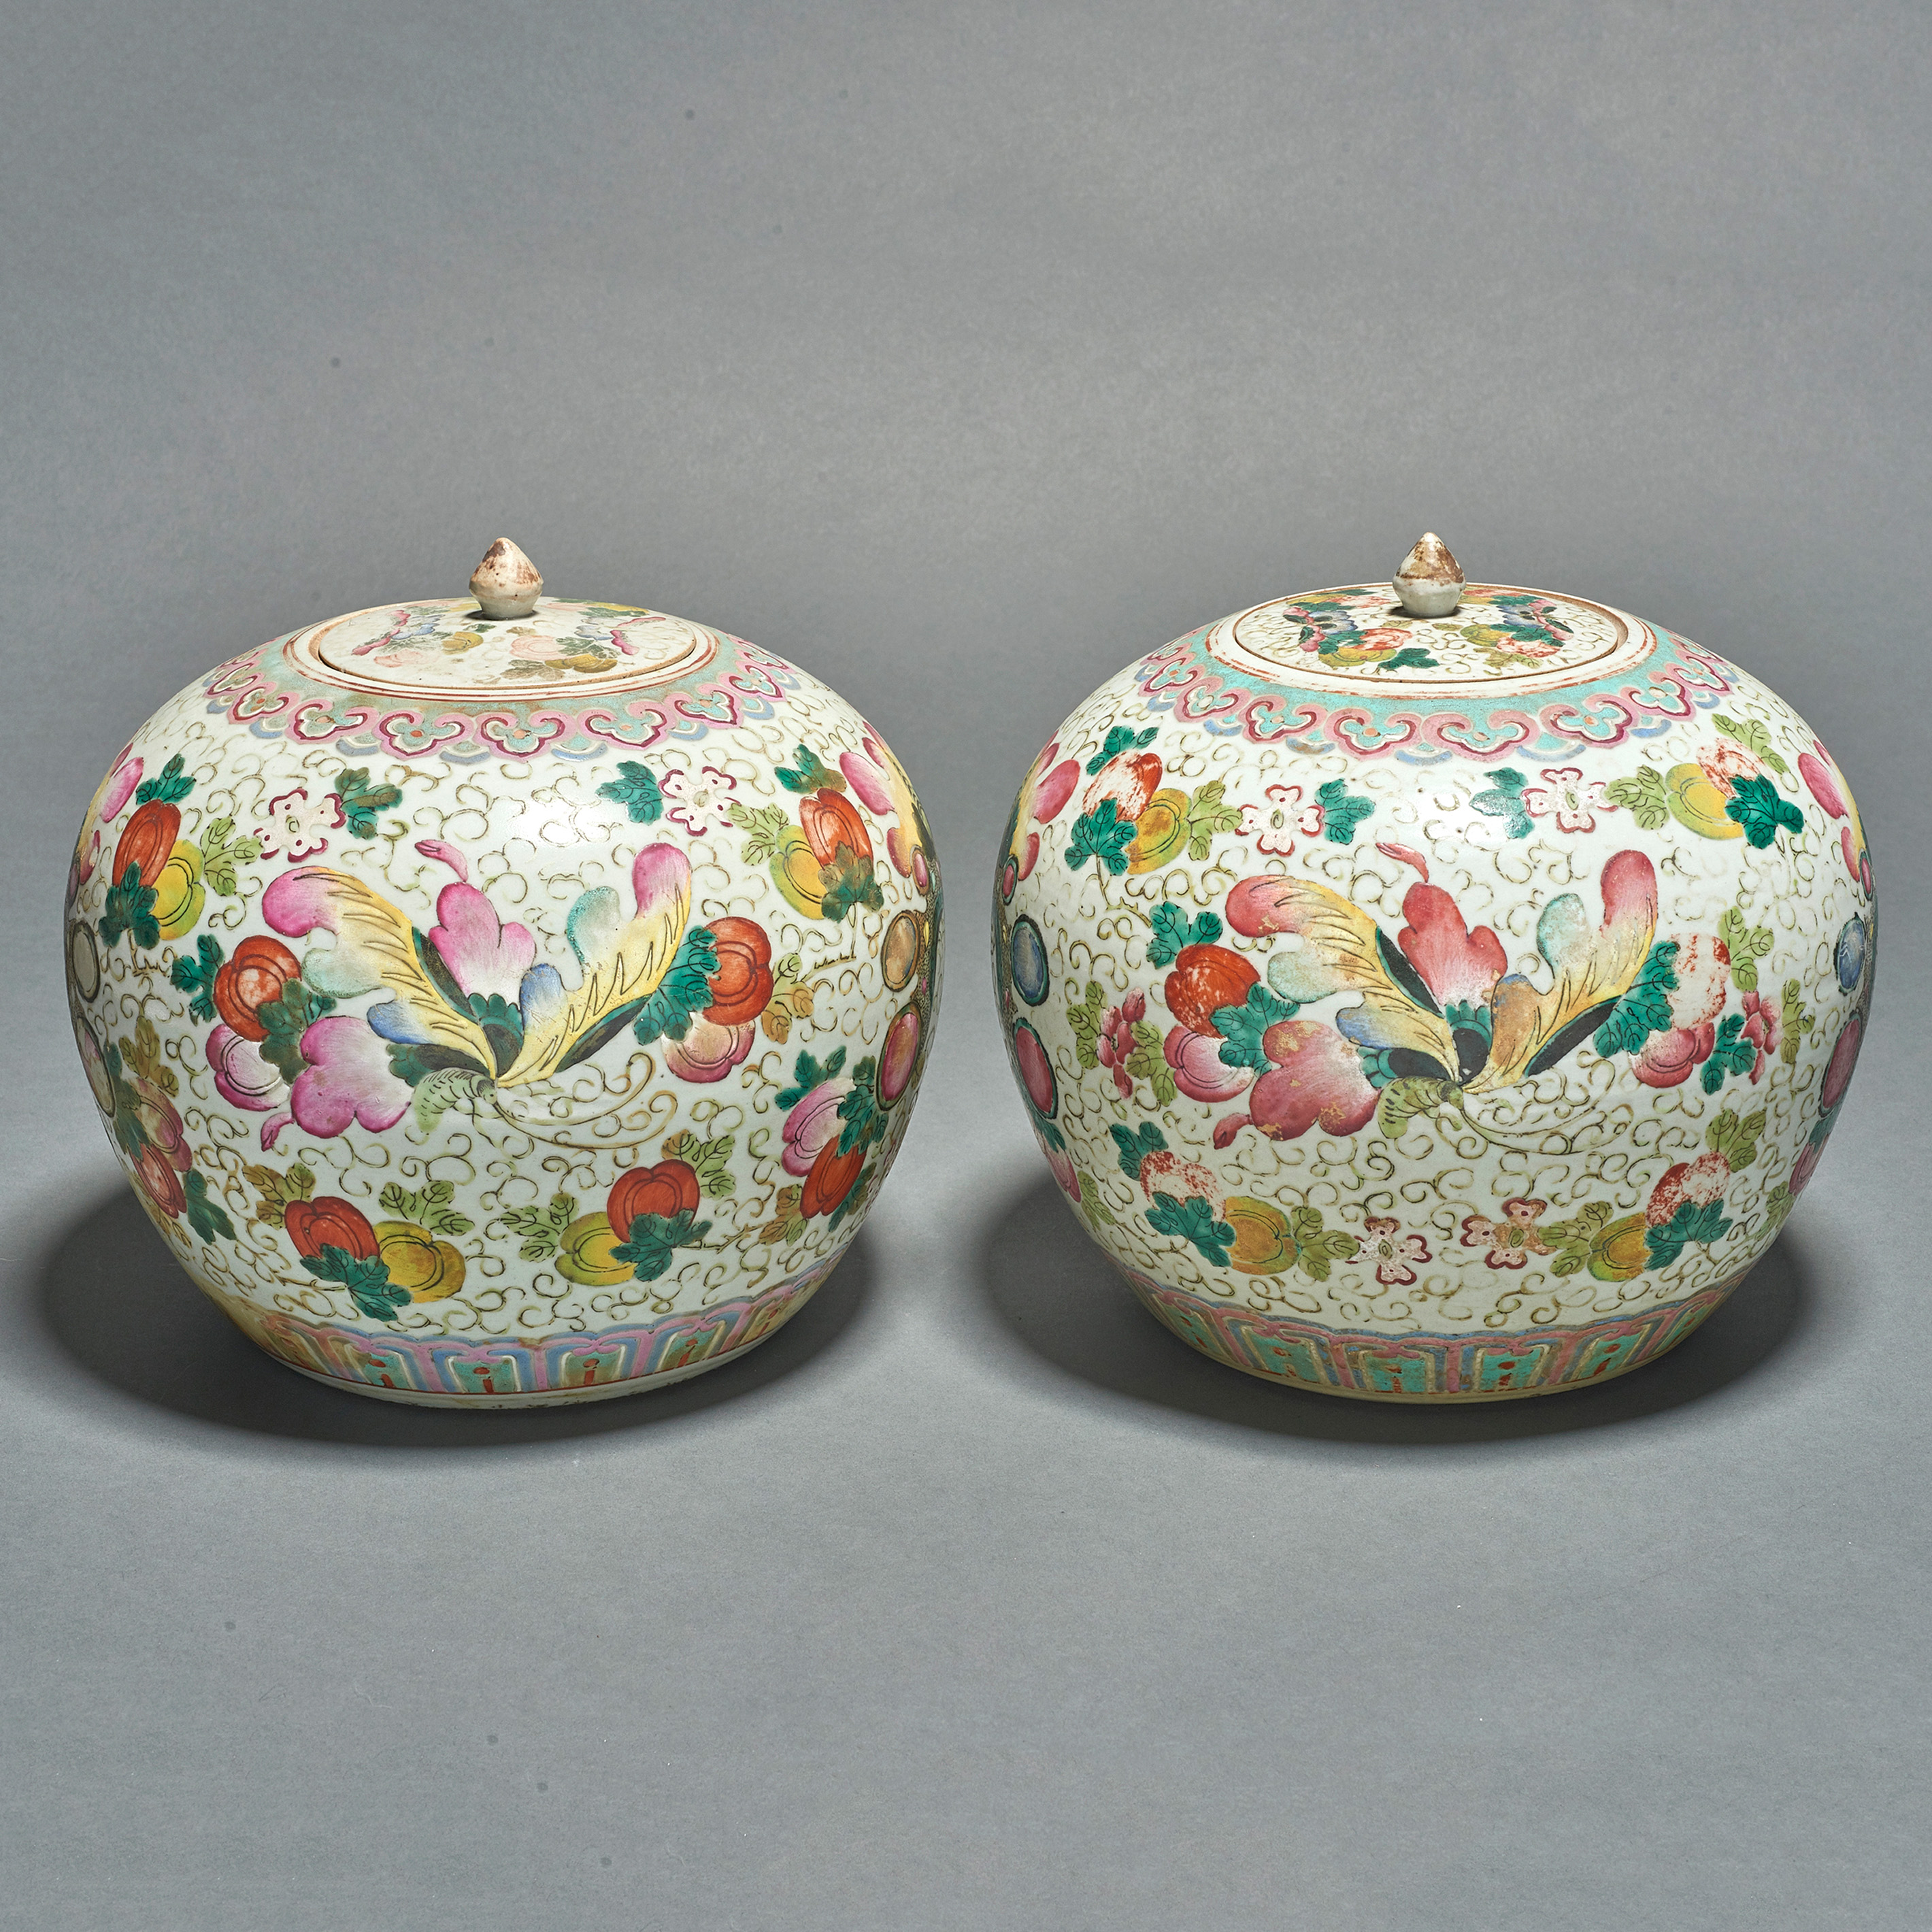 PAIR OF CHINESE FAMILLE ROSE COVERED 3a405f